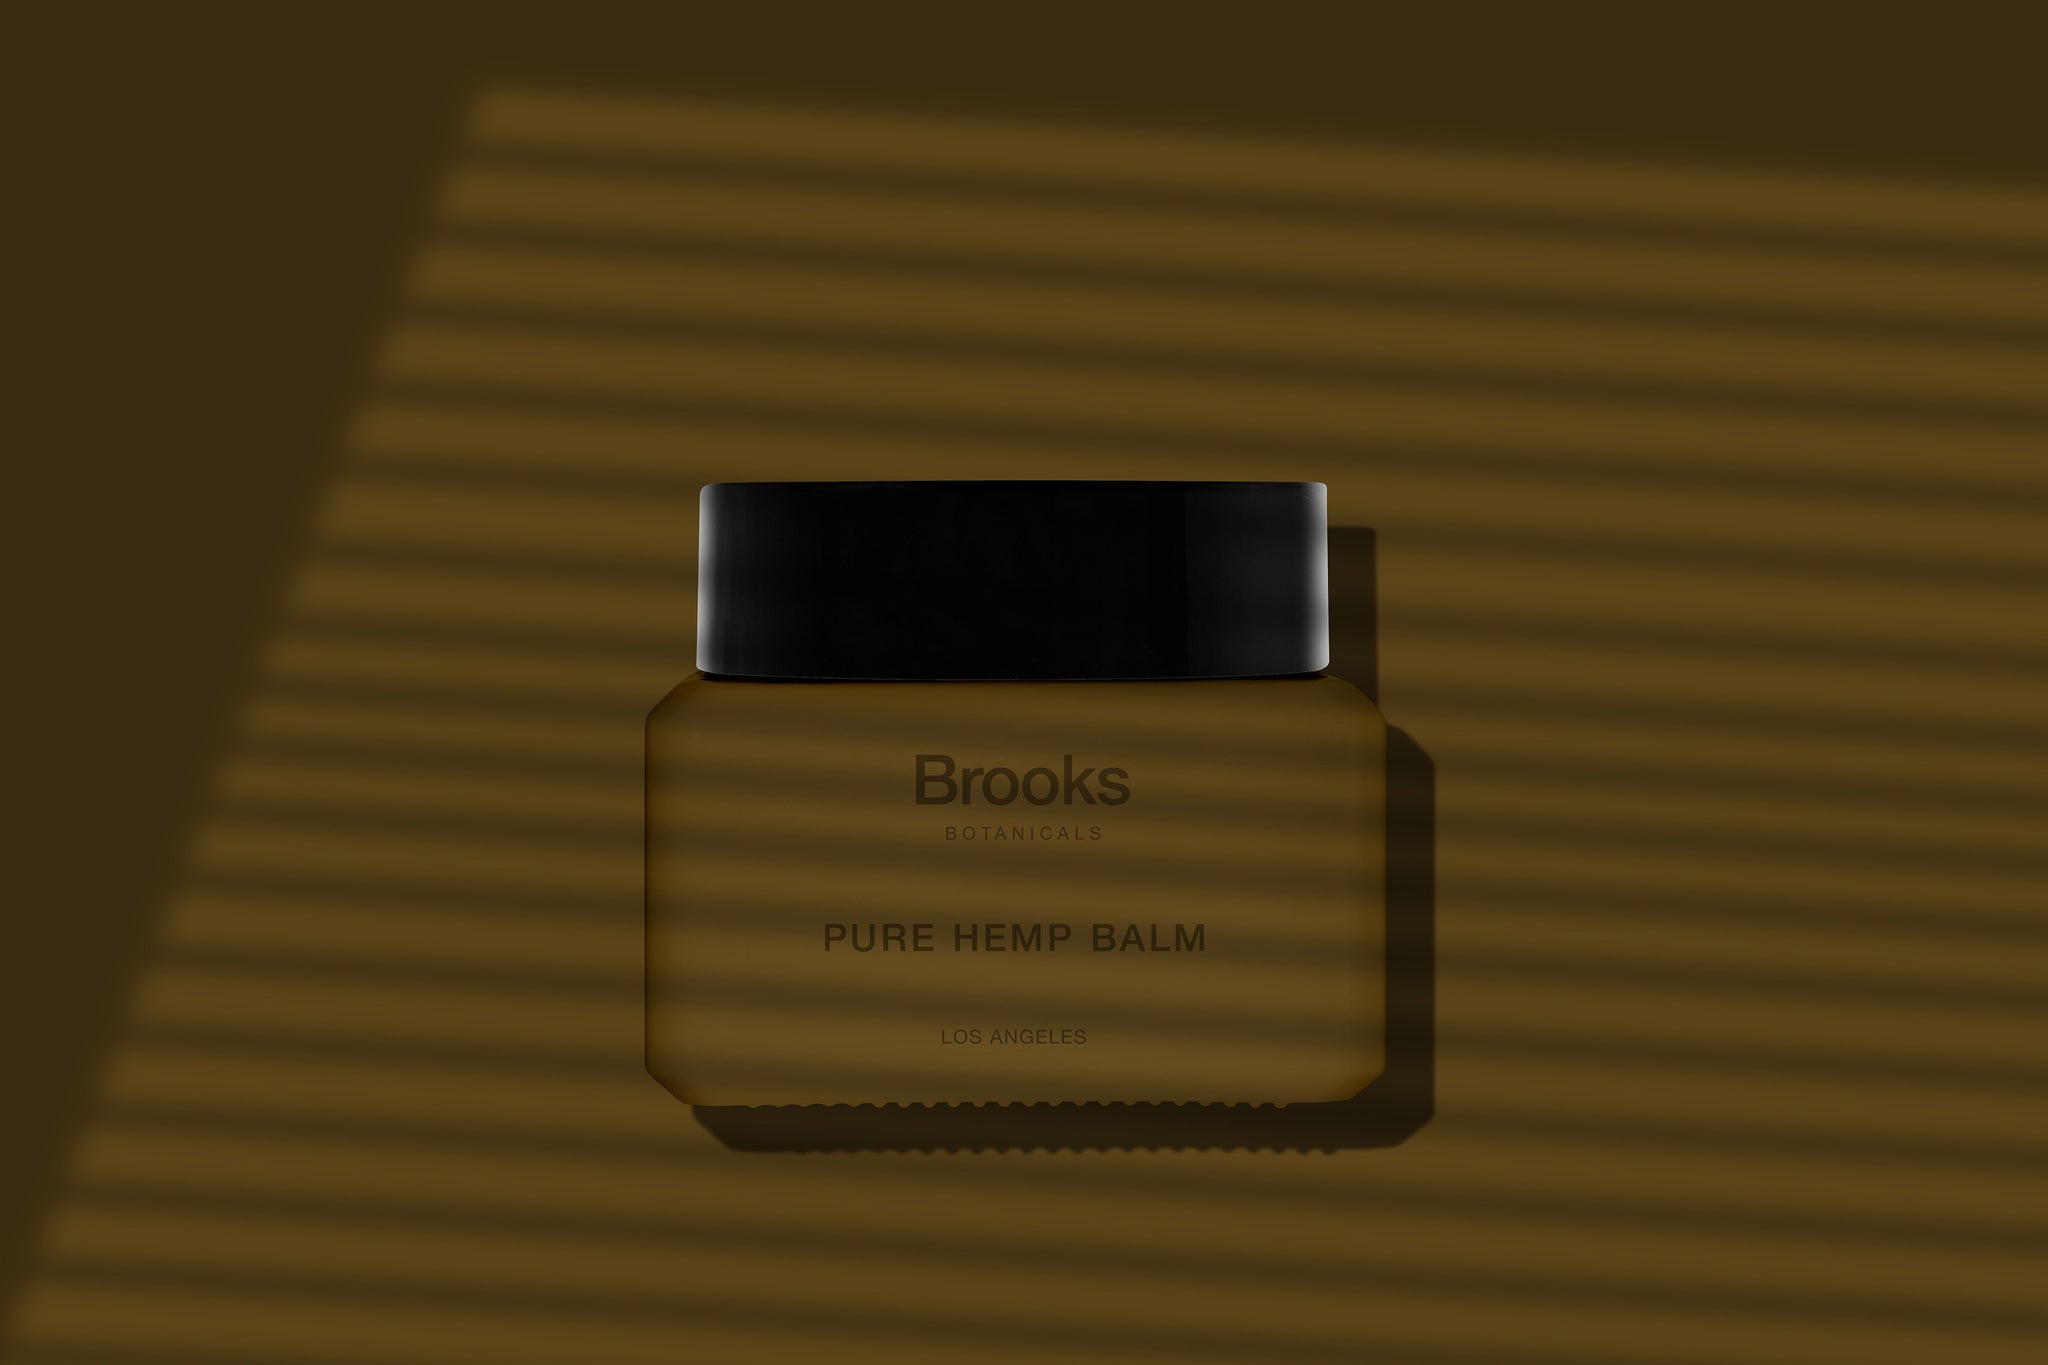 Square Cosmetic Container Mockup - Copal Studio Packaging Mockups For Designers